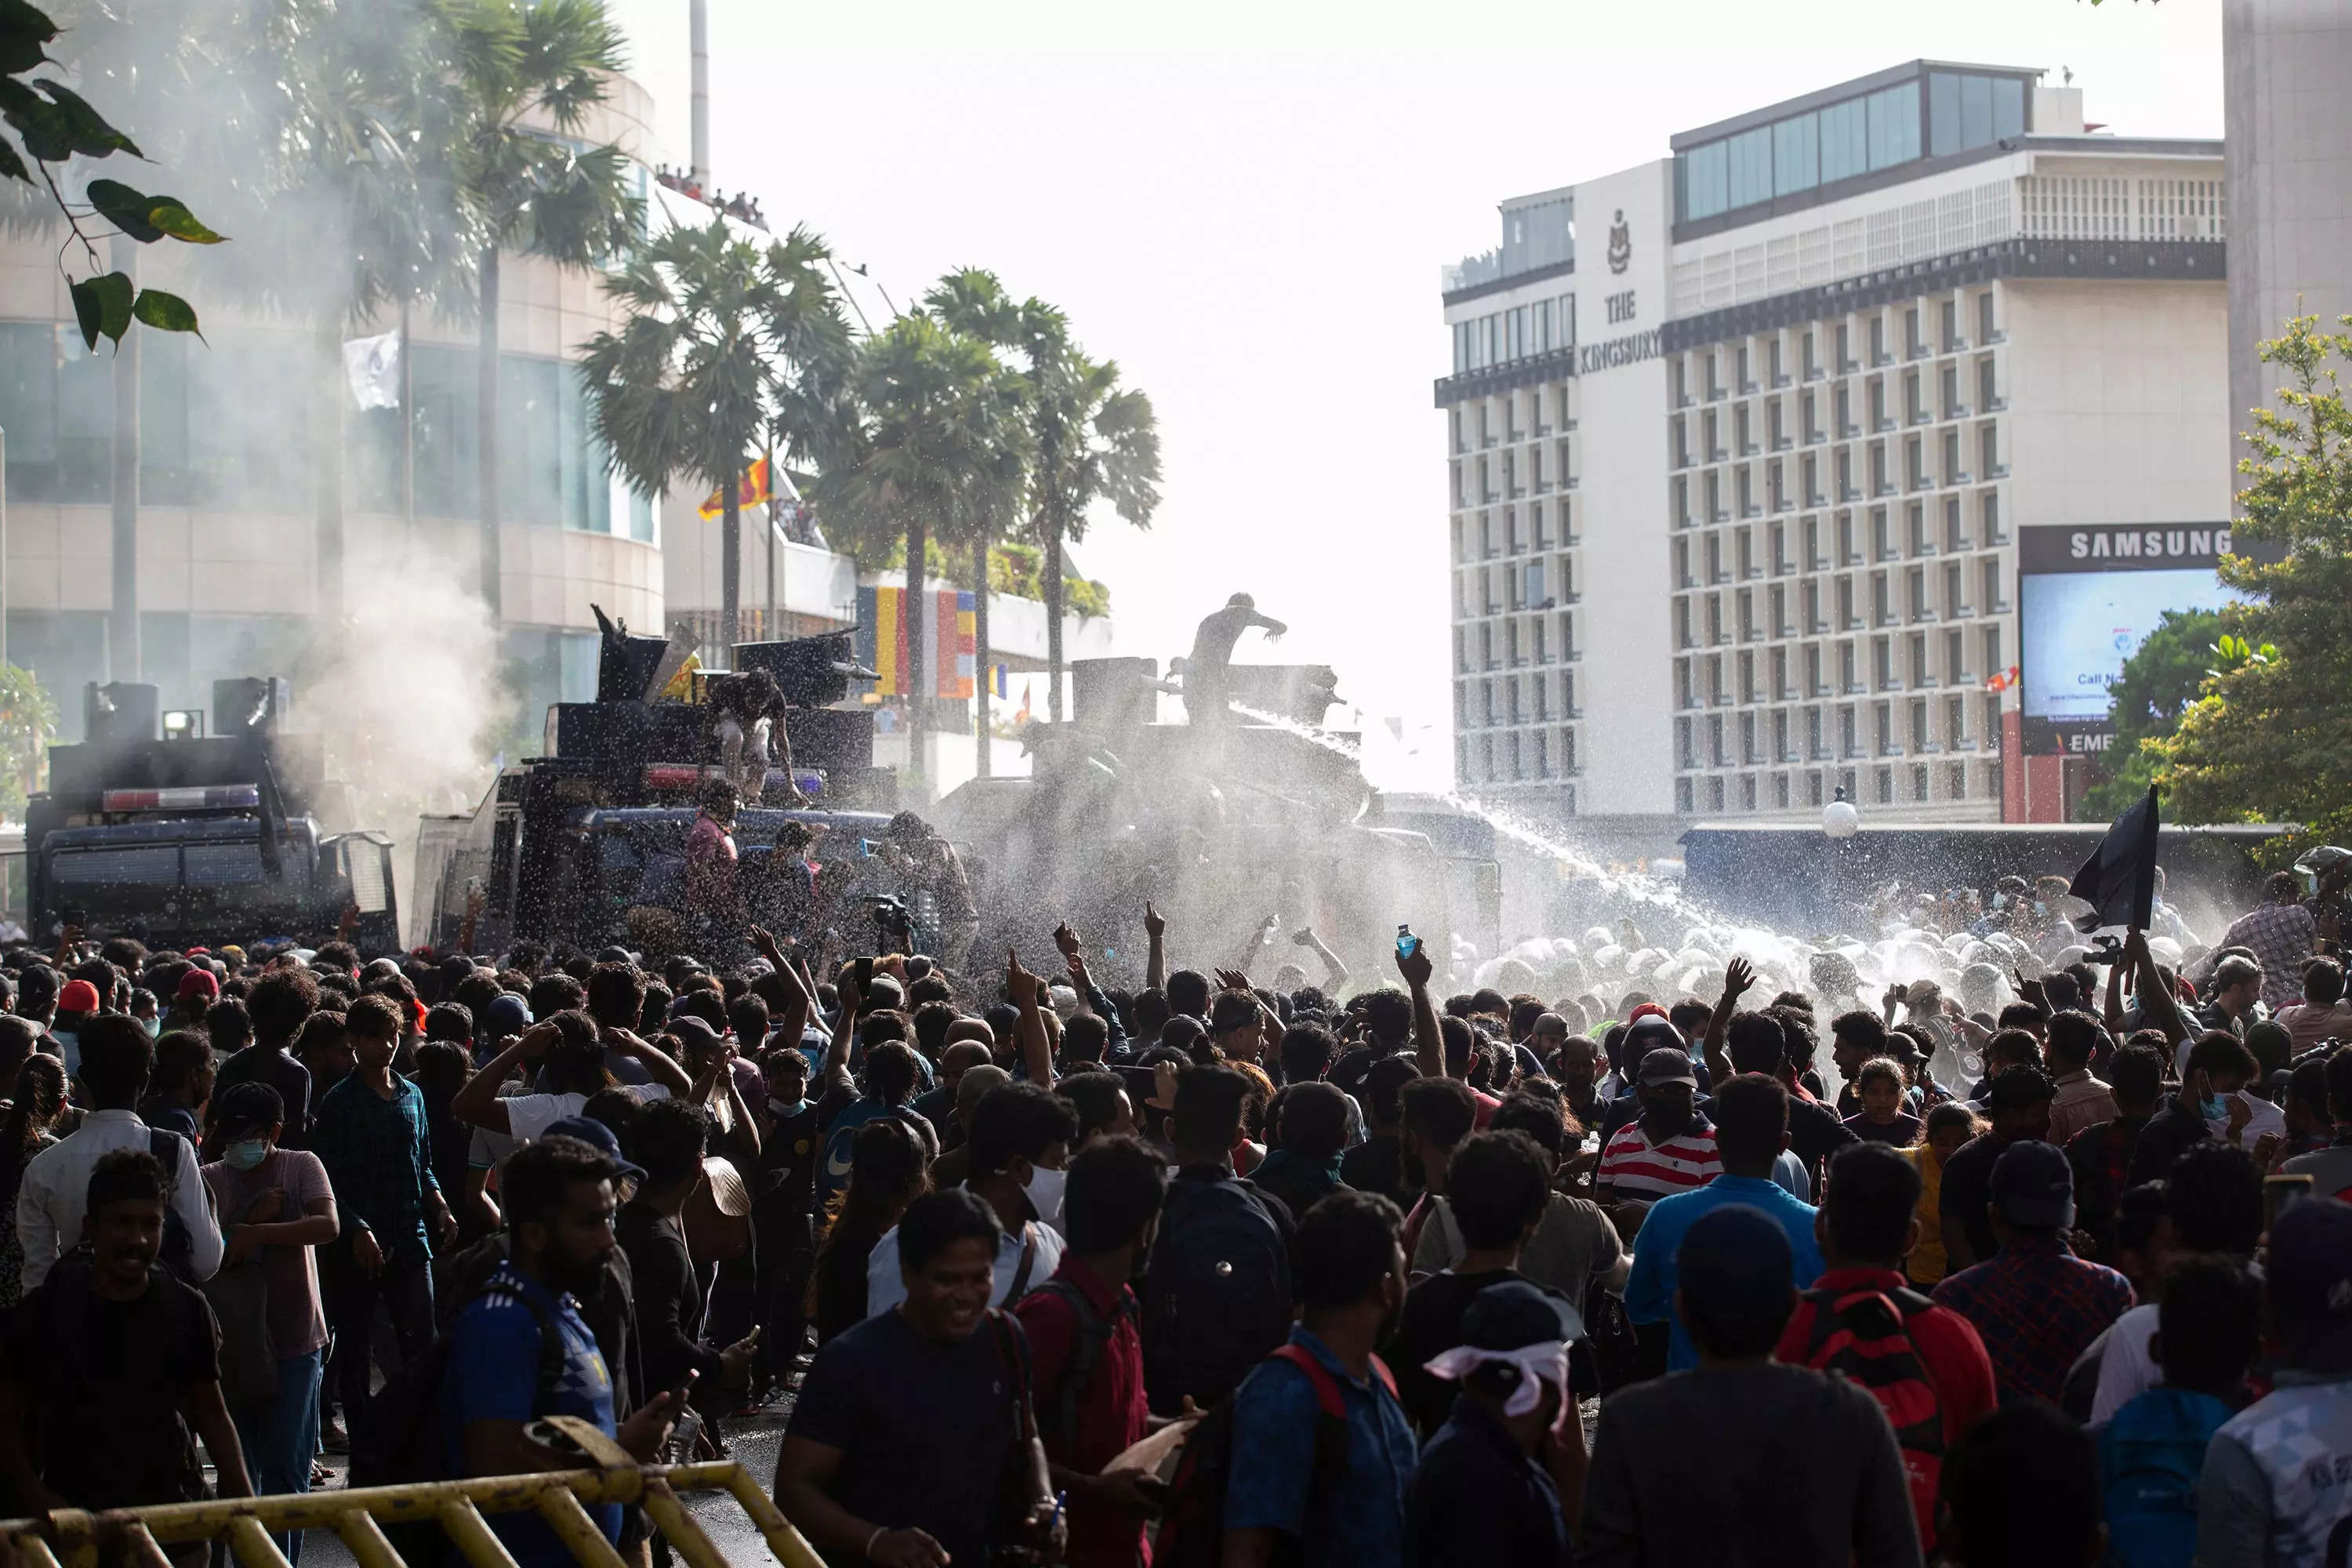 Protesters on the street with a water cannon behind them.